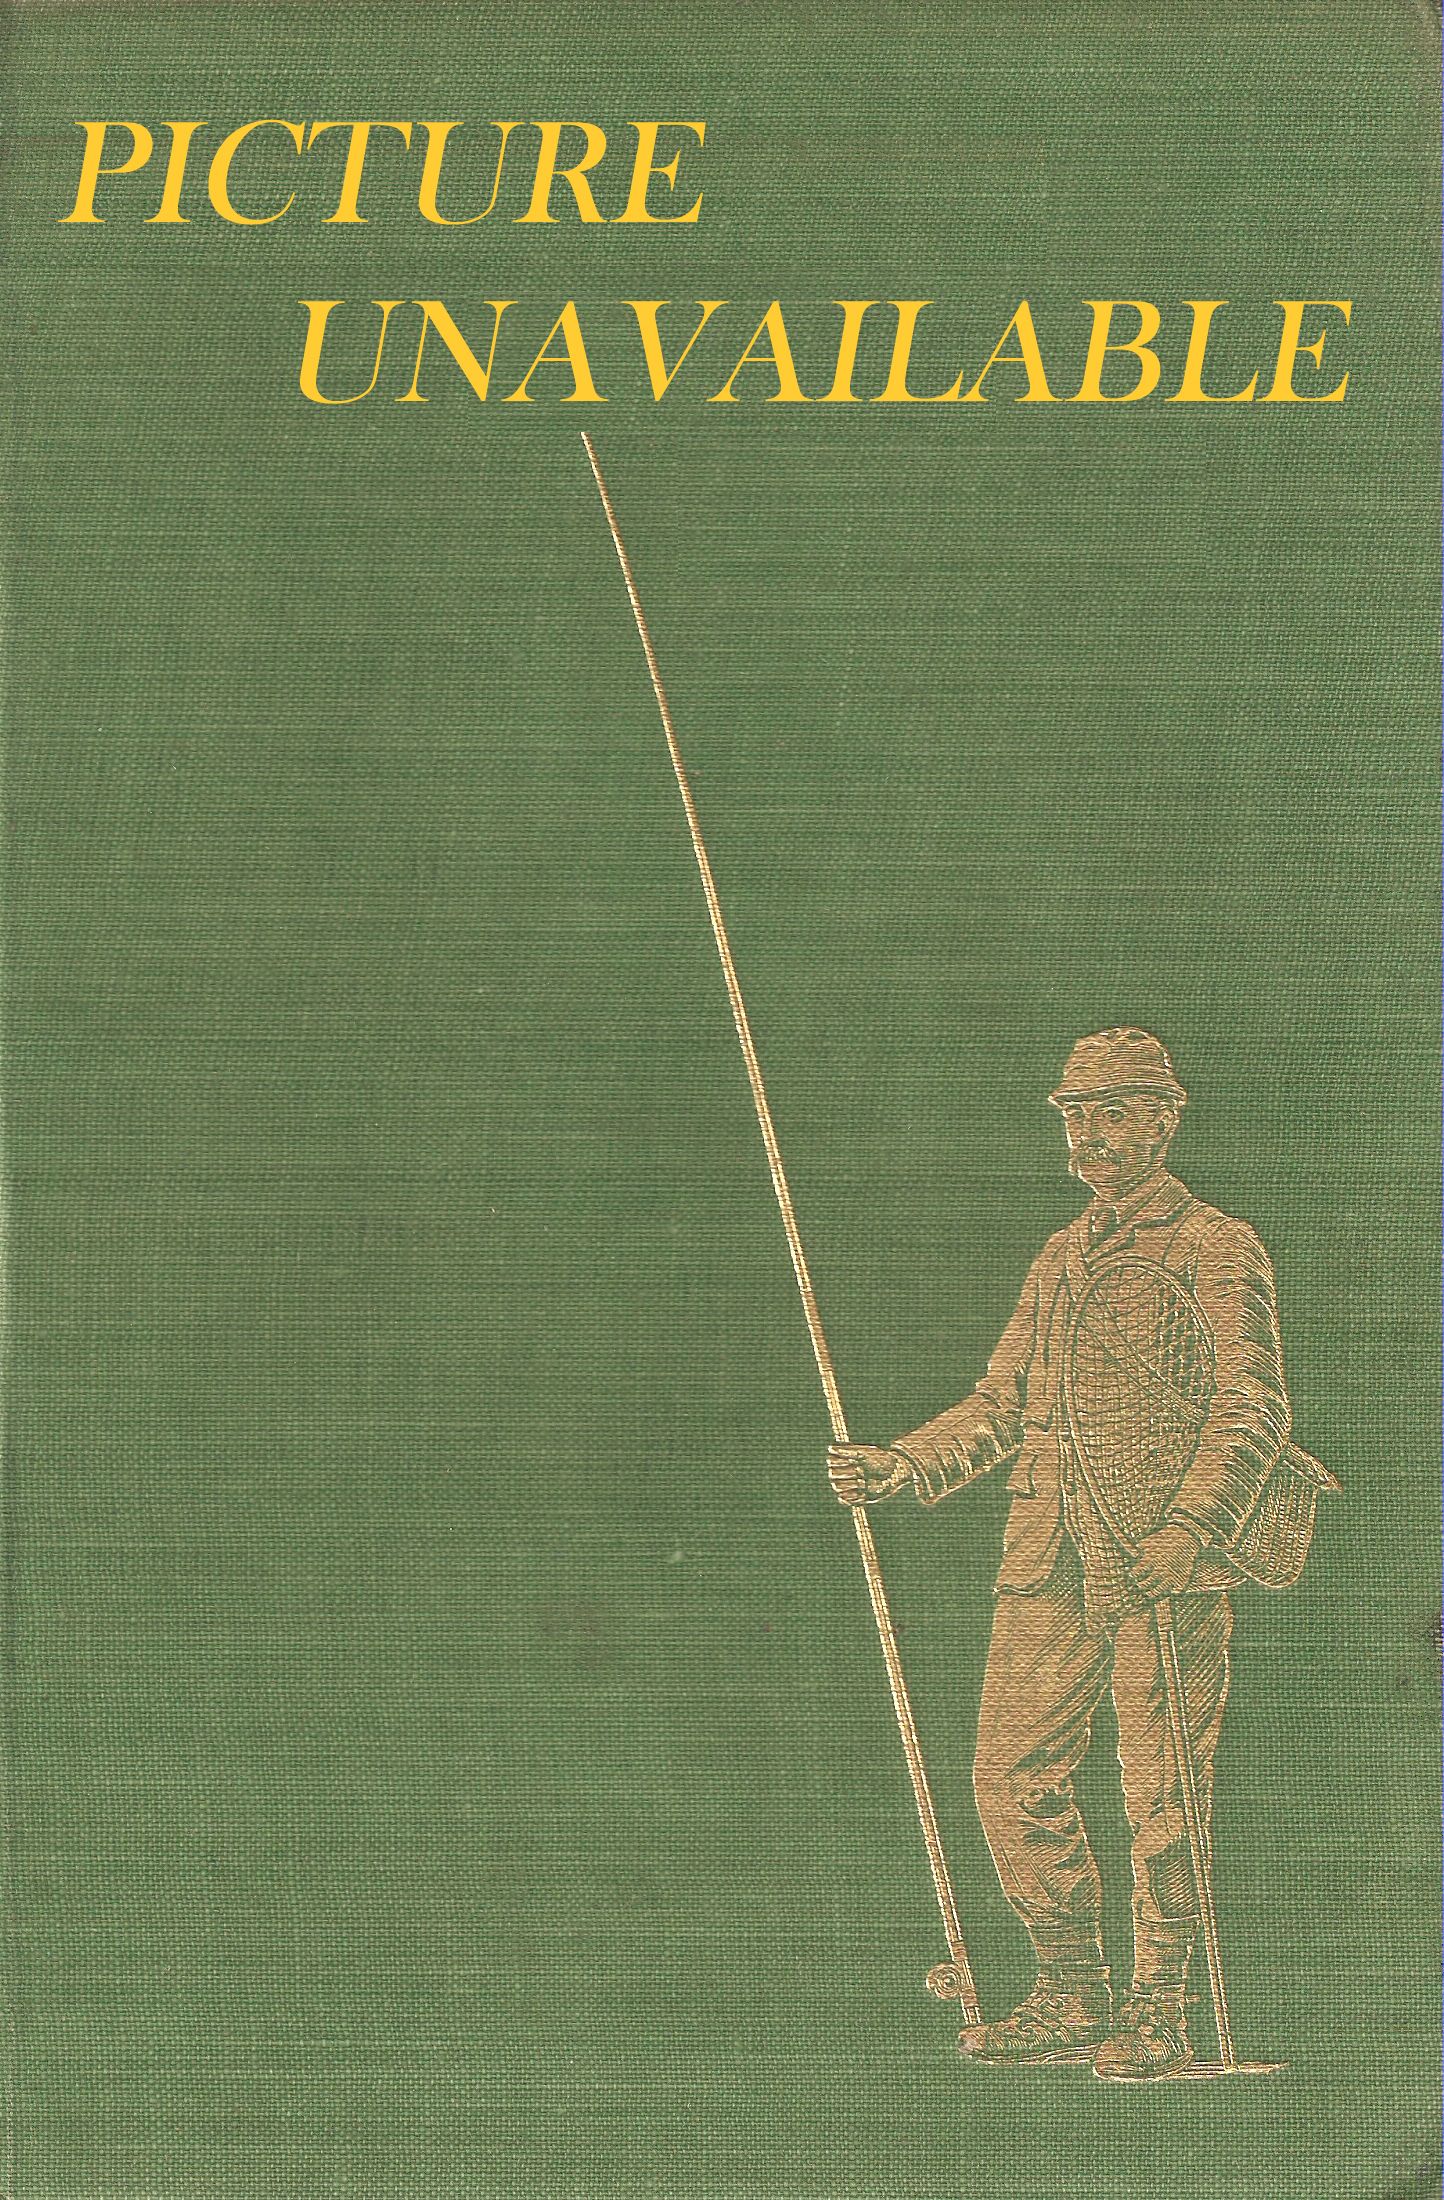 THE AUSTRALIAN and NEW ZEALAND FLYFISHERS ANNUAL: VOLUME FOUR.